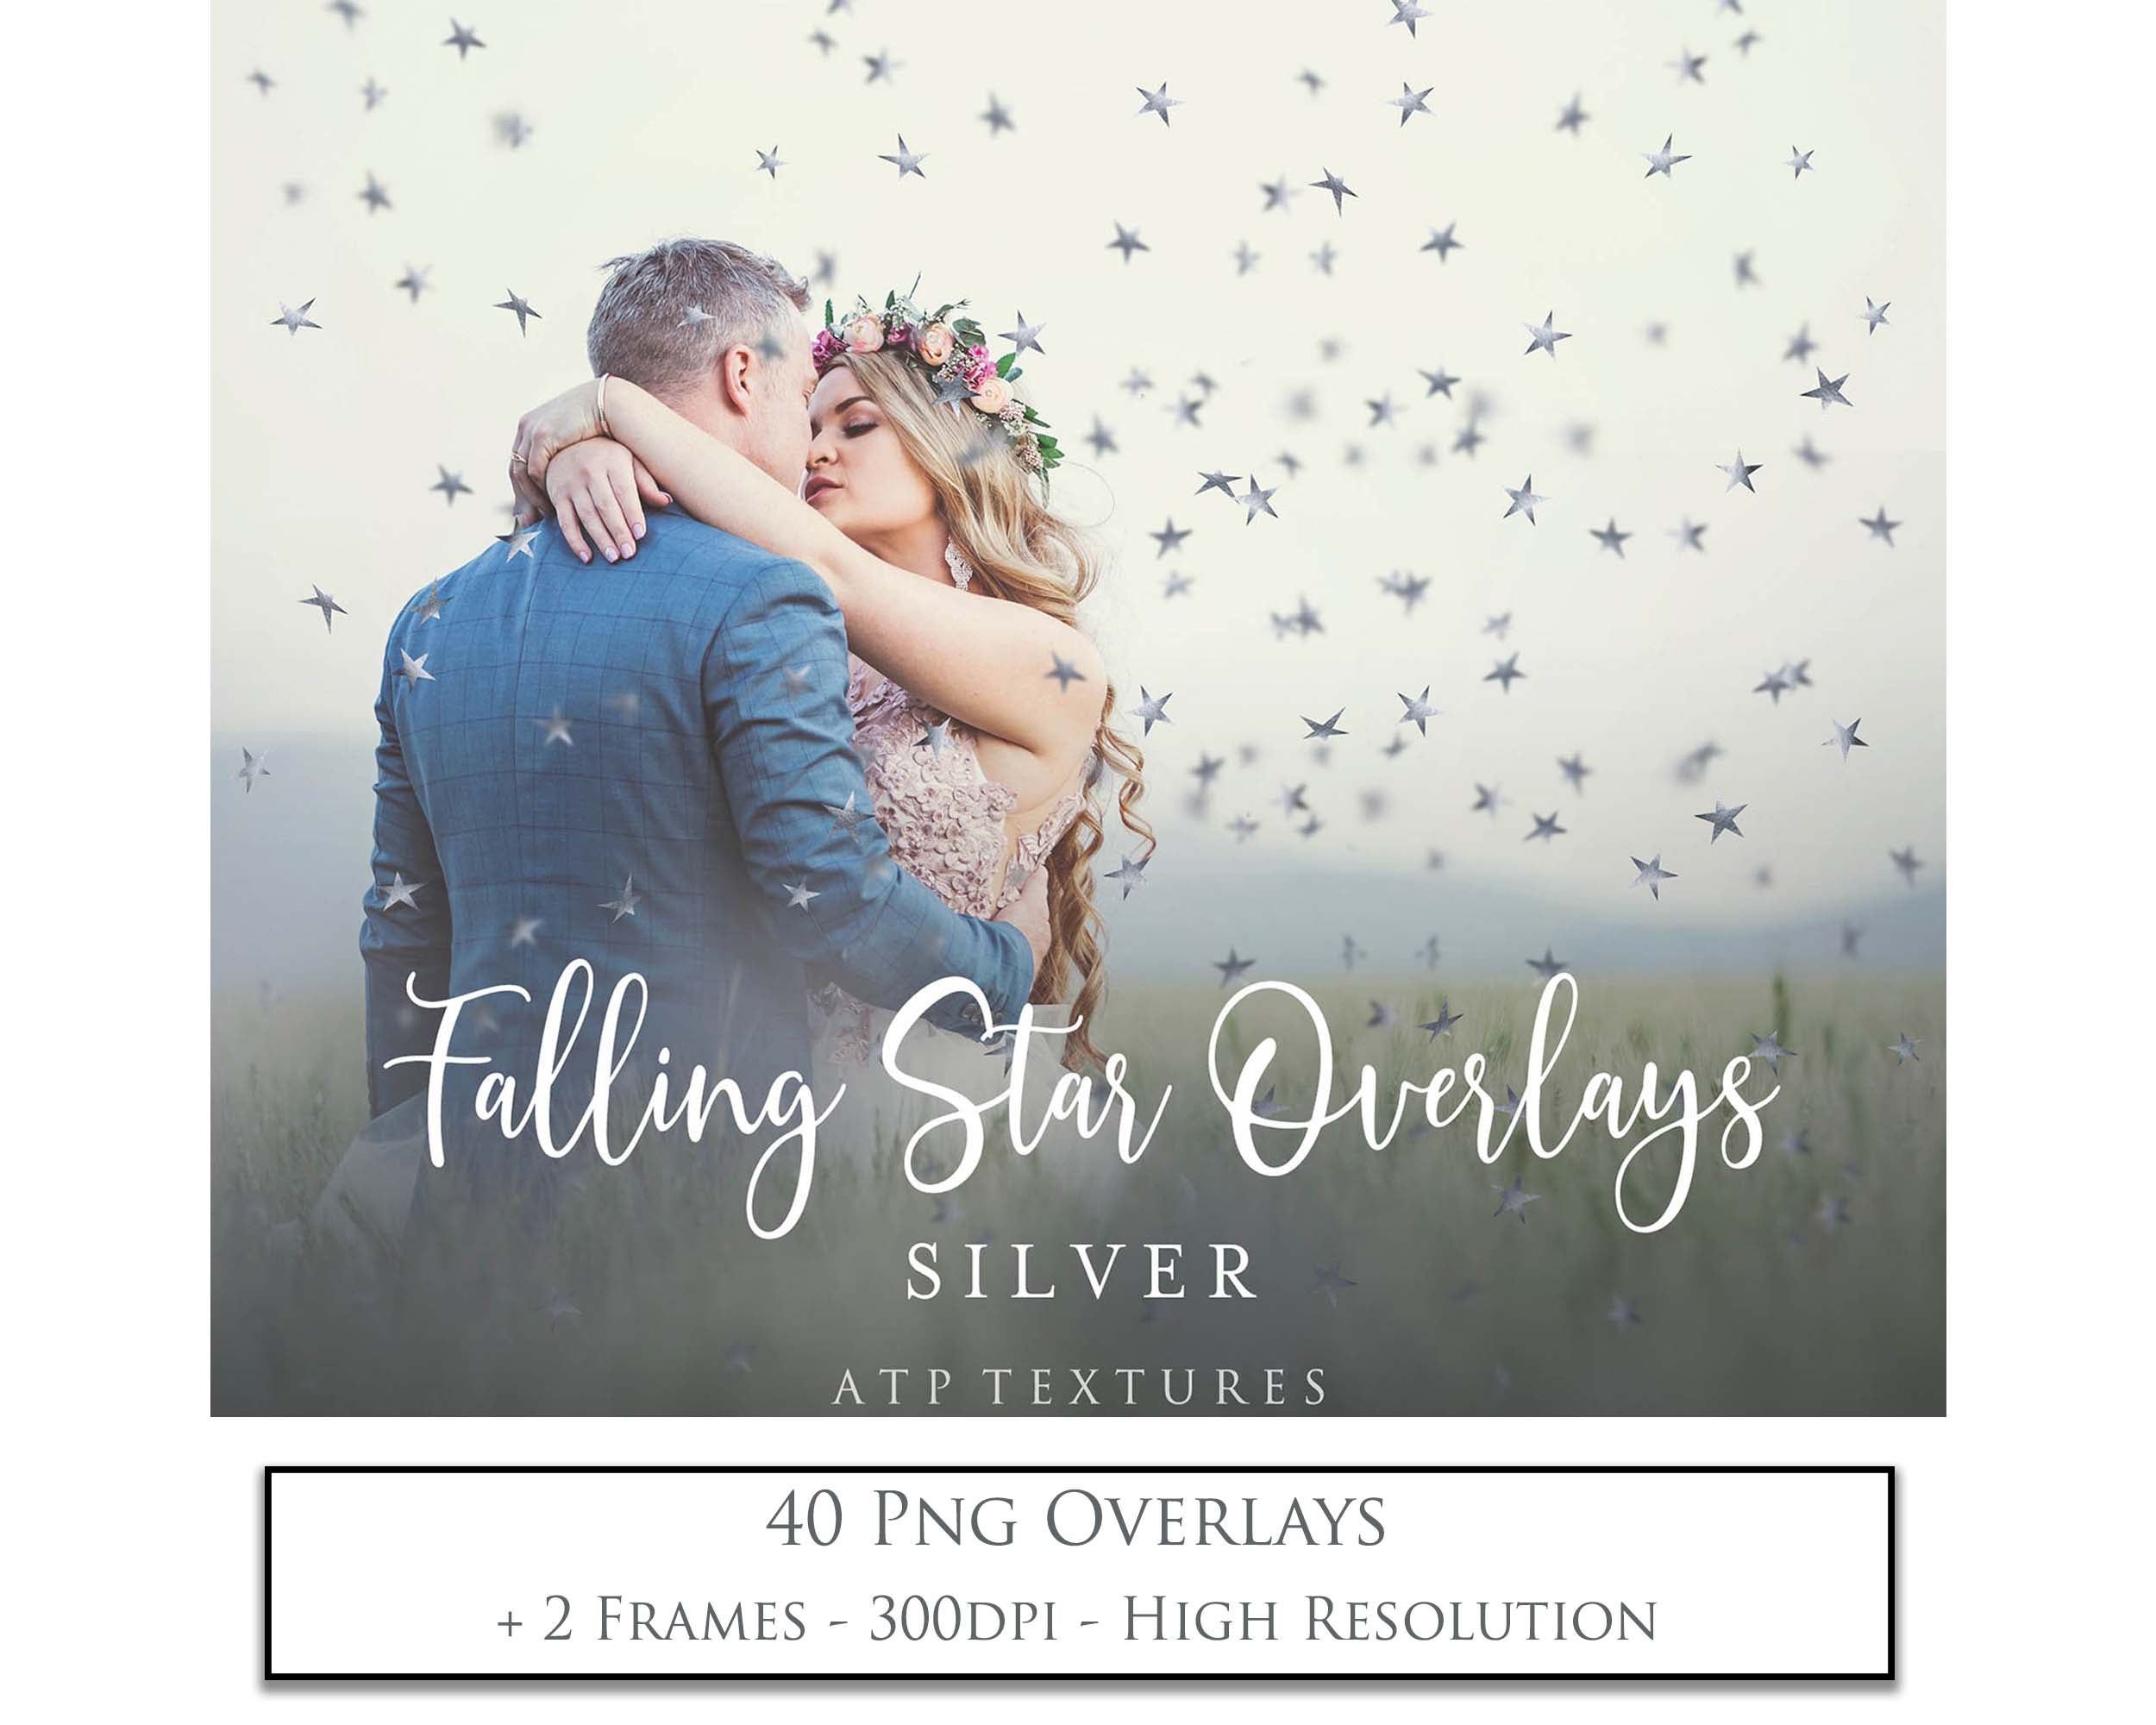 Overlays for Photography. Png clipart confetti, Overlays for photographers, Photoshop Overlay, digital edits, photoshop. Photo Editing graphic assets. Red, gold, falling valentine love. Wedding, Couples Photo. High resolution, ATP textures. 